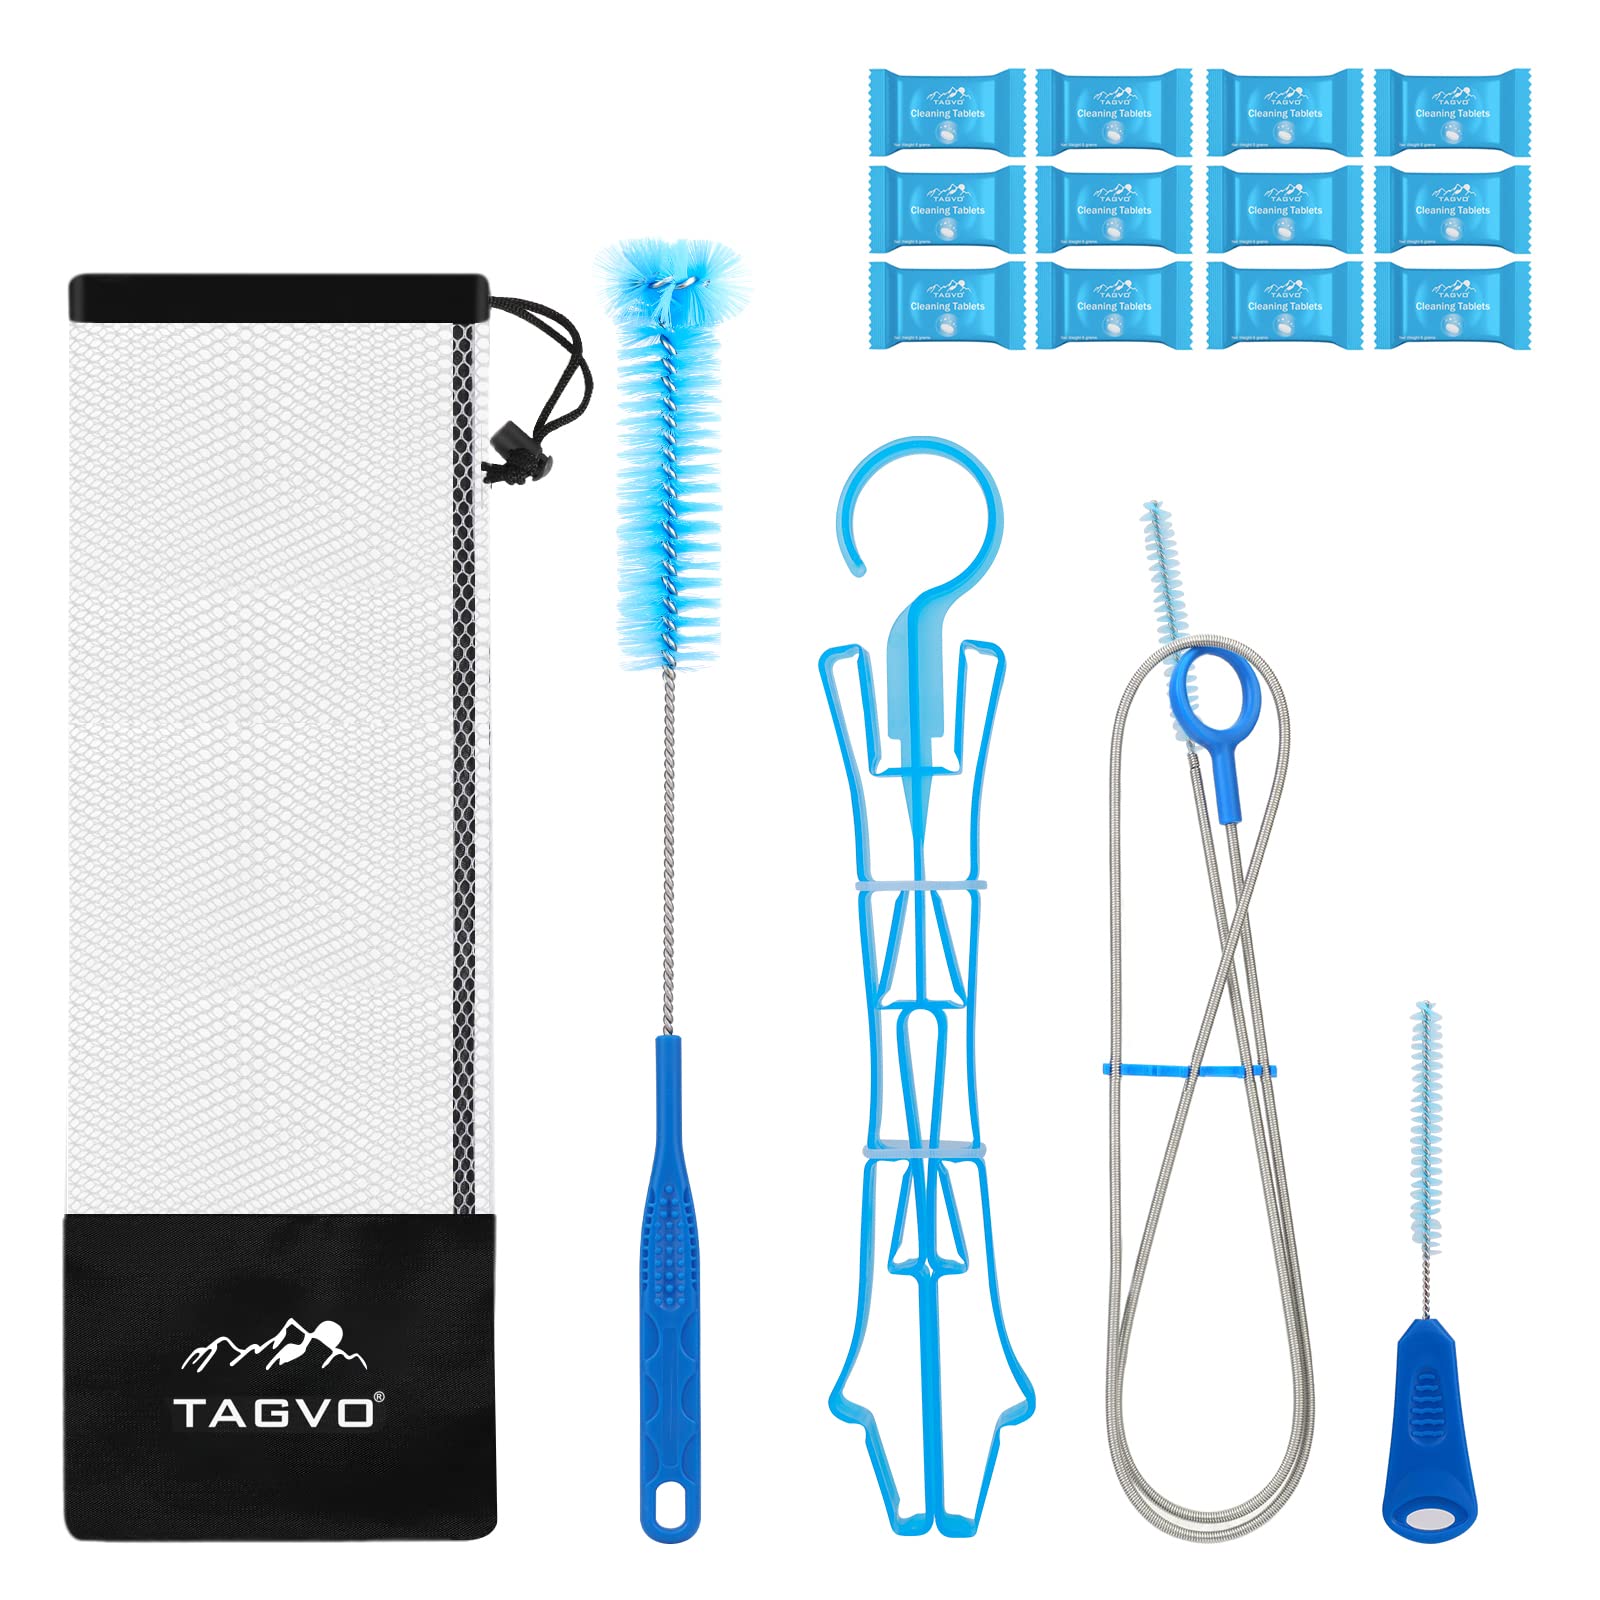 TAGVO Hydration Bladder Cleaning Kit, 6 in 1 Water Bladder Cleaner Set - 3 Brushes, Collapsible Hanger, 12 Cleaning Tablets & Ca